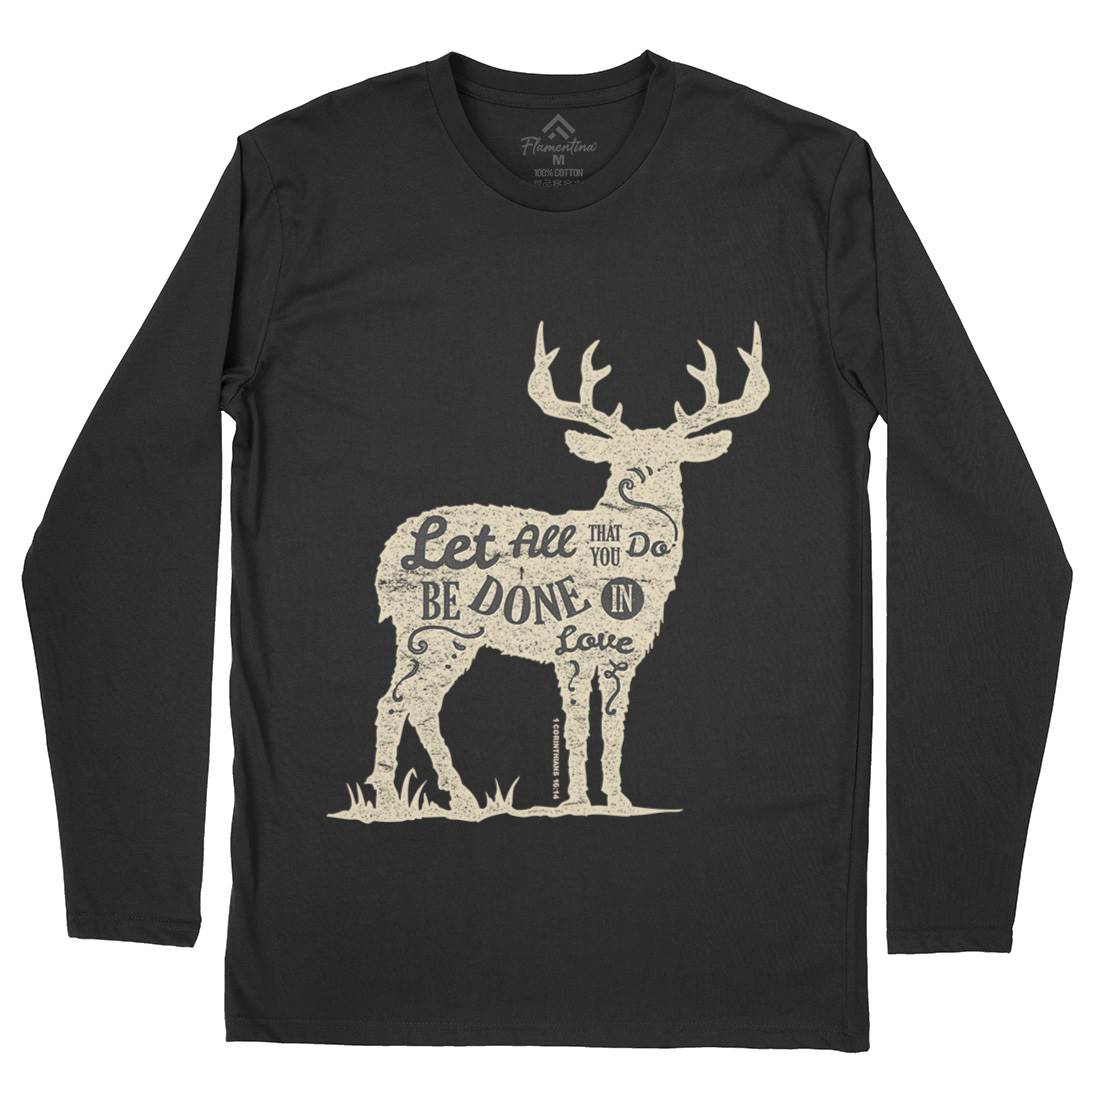 Done In Love Mens Long Sleeve T-Shirt Religion A310